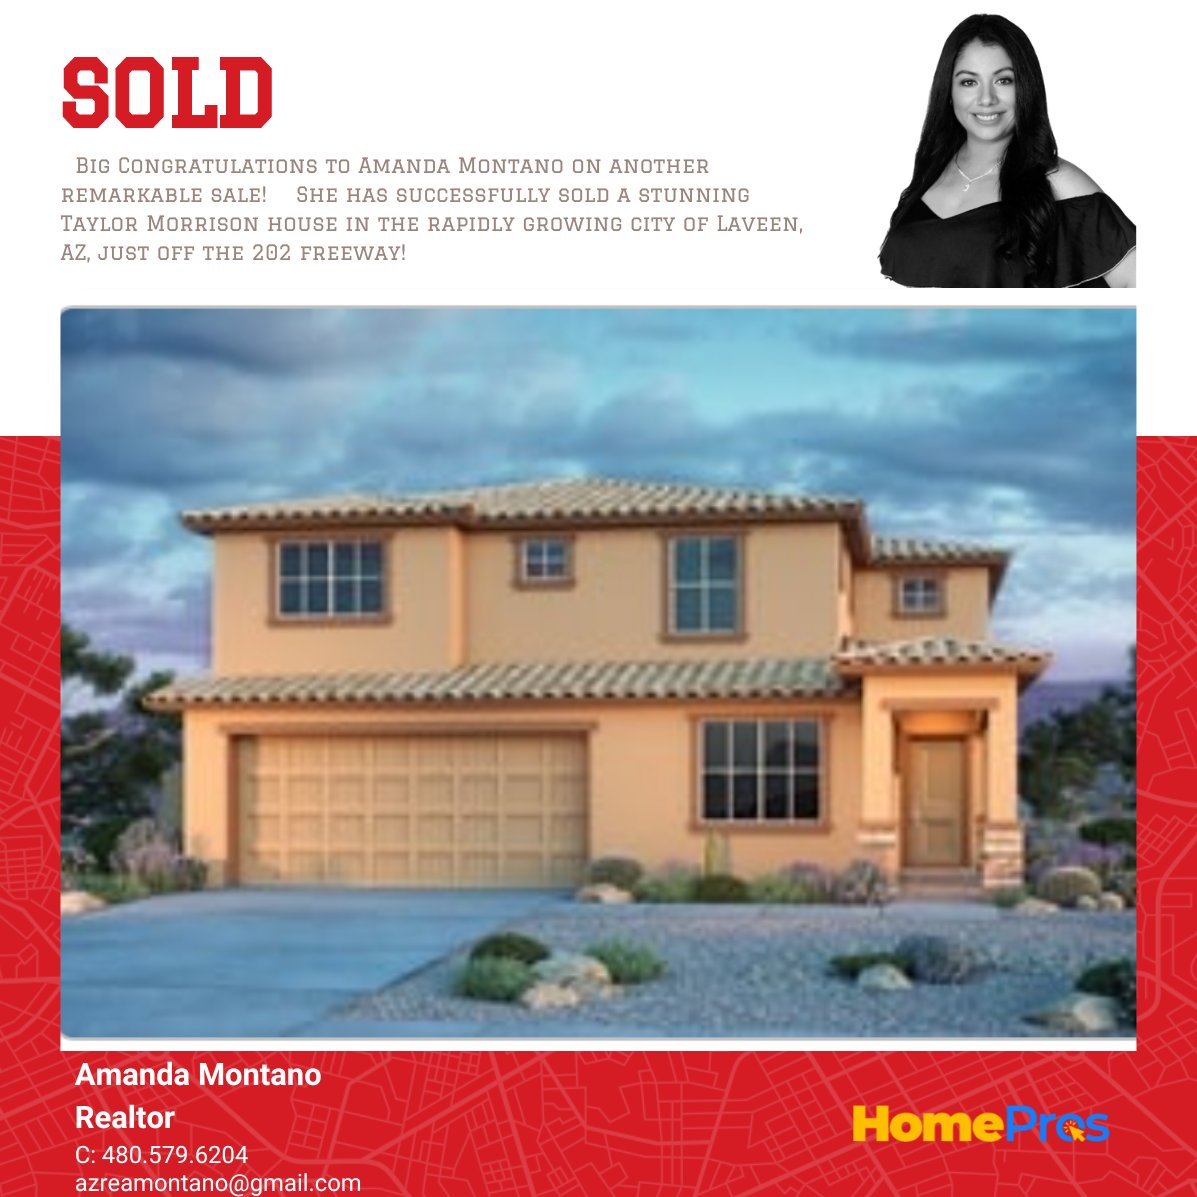 🎉 Big Congratulations to Amanda Montano on another remarkable sale! 🏡🔑 She has successfully sold a stunning Taylor Morrison house in the rapidly growing city of Laveen, AZ, just off the 202 freeway! 🌟✨

#Congratulations #SuccessfulSale #LaveenRealEstate #AmandaMontano